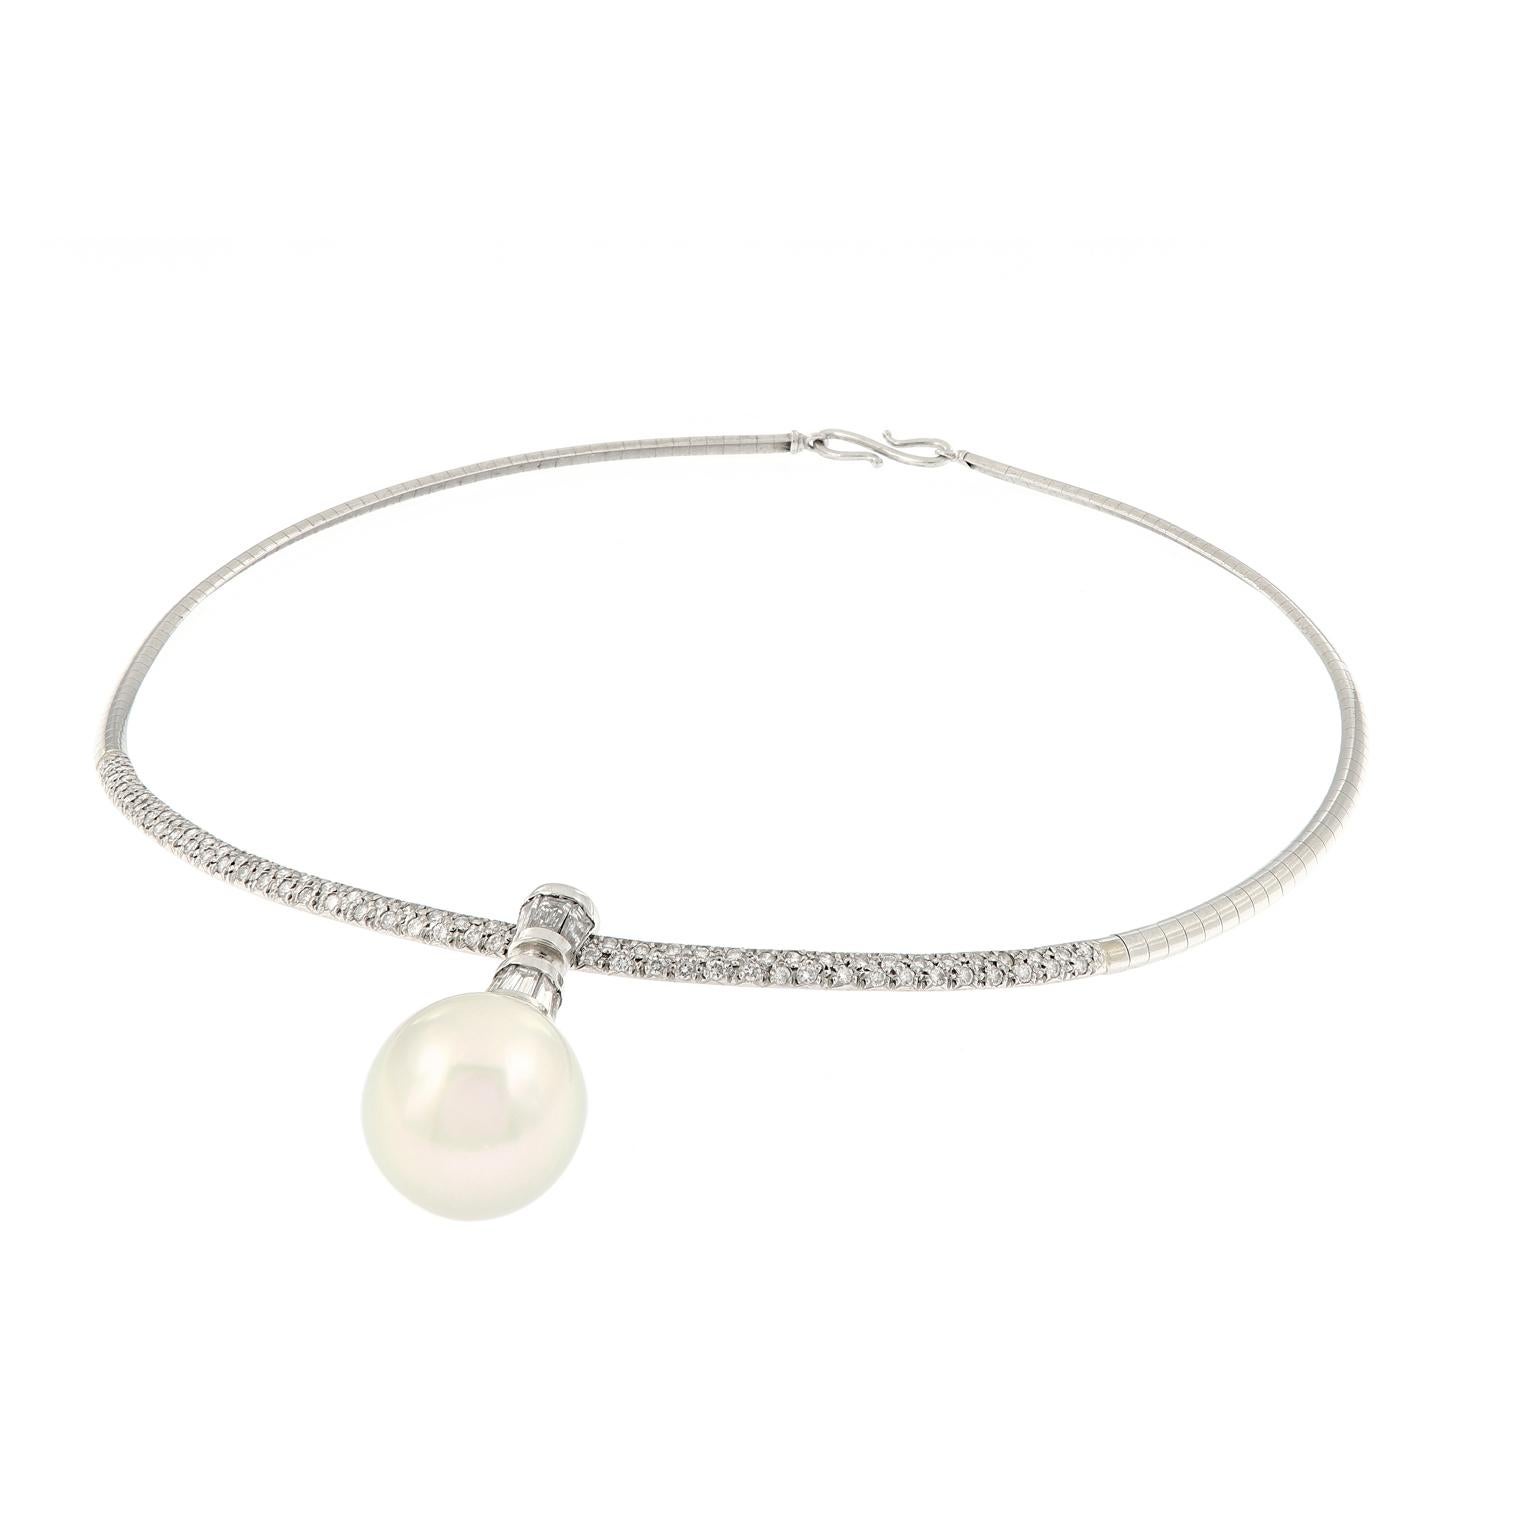 The beautiful platinum domed Omega necklace is accented with pave set diamonds and features a white South Sea cultured pearl pendant. Pearl pendant is detachable and is capped with baguette diamonds. This necklace is 15.5 inches long and in